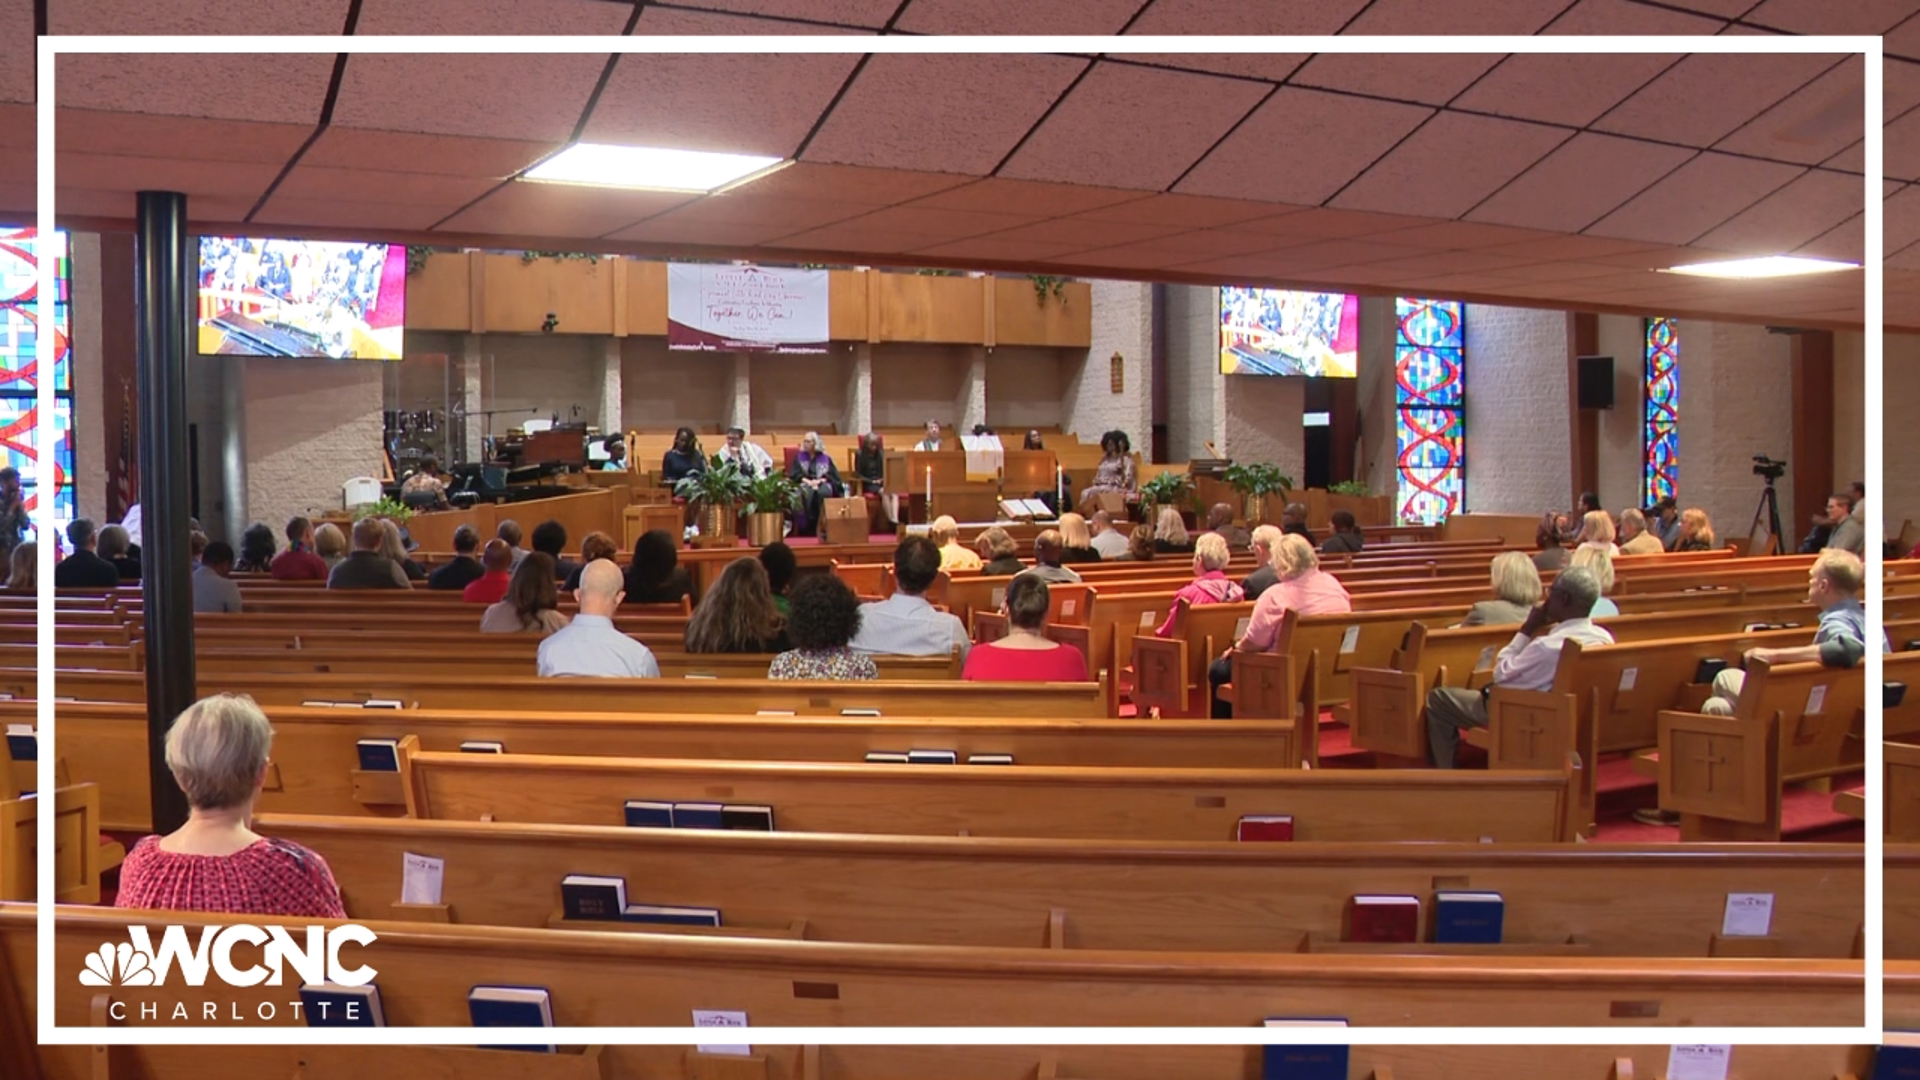 The vigil was held at Little Rock AME Zion, located on North McDowell Street.